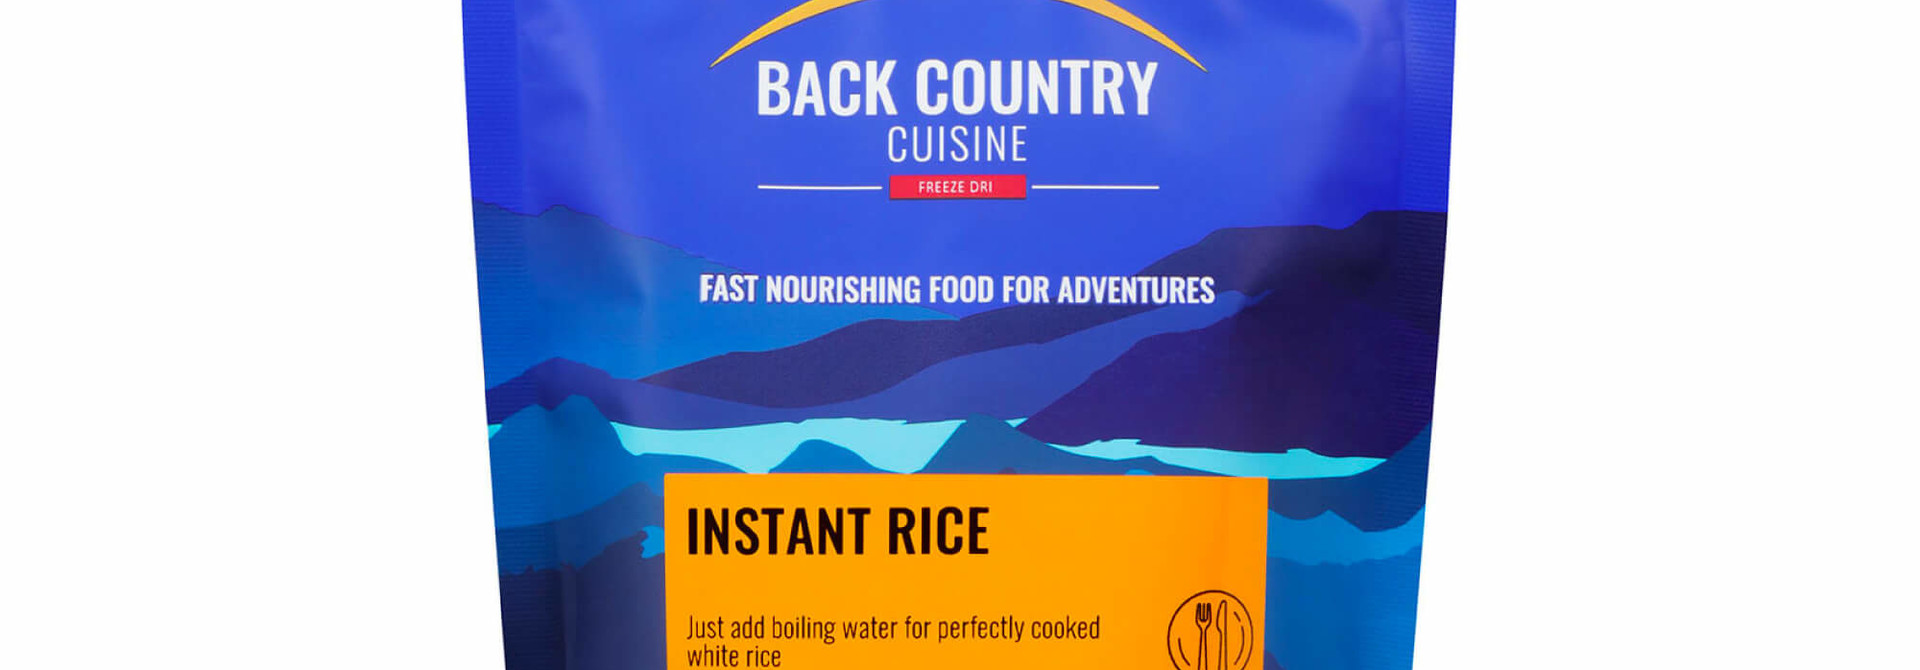 Back Country Cuisine Instant Rice Family